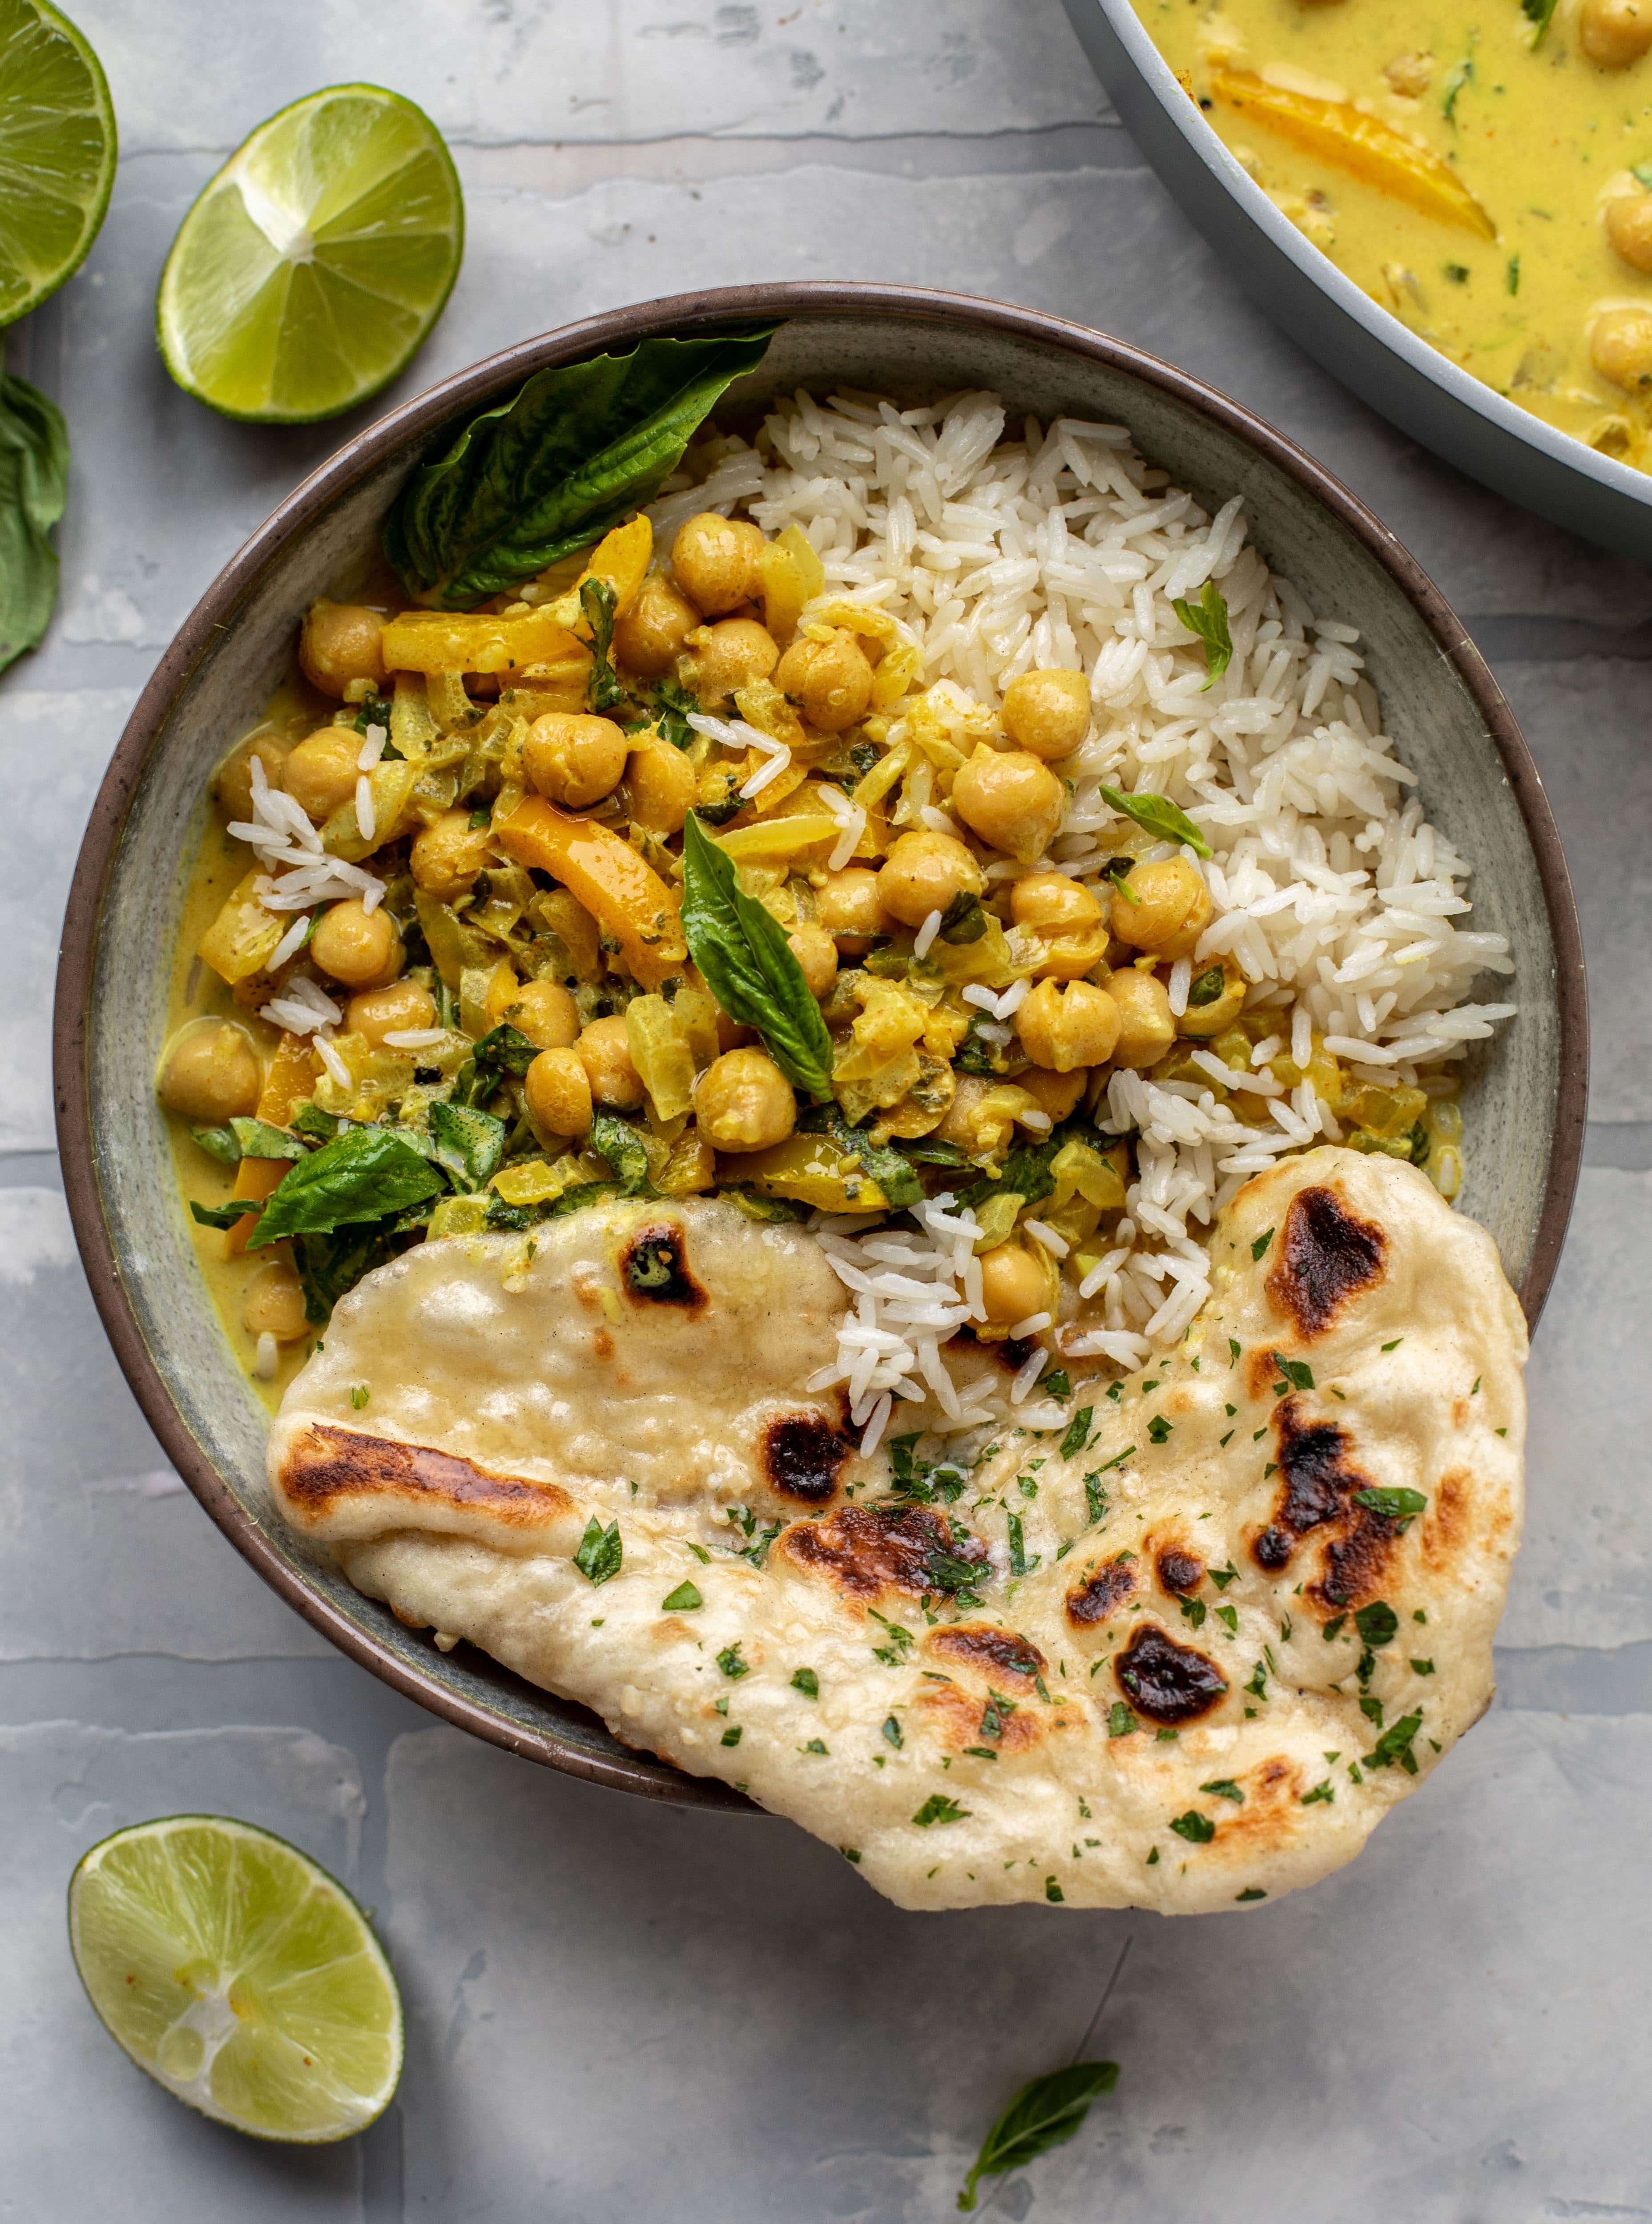 This basil chickpea coconut curry comes together in 20 minutes! Serve with jasmine rice or your favorite naan, or both! So easy and flavorful.